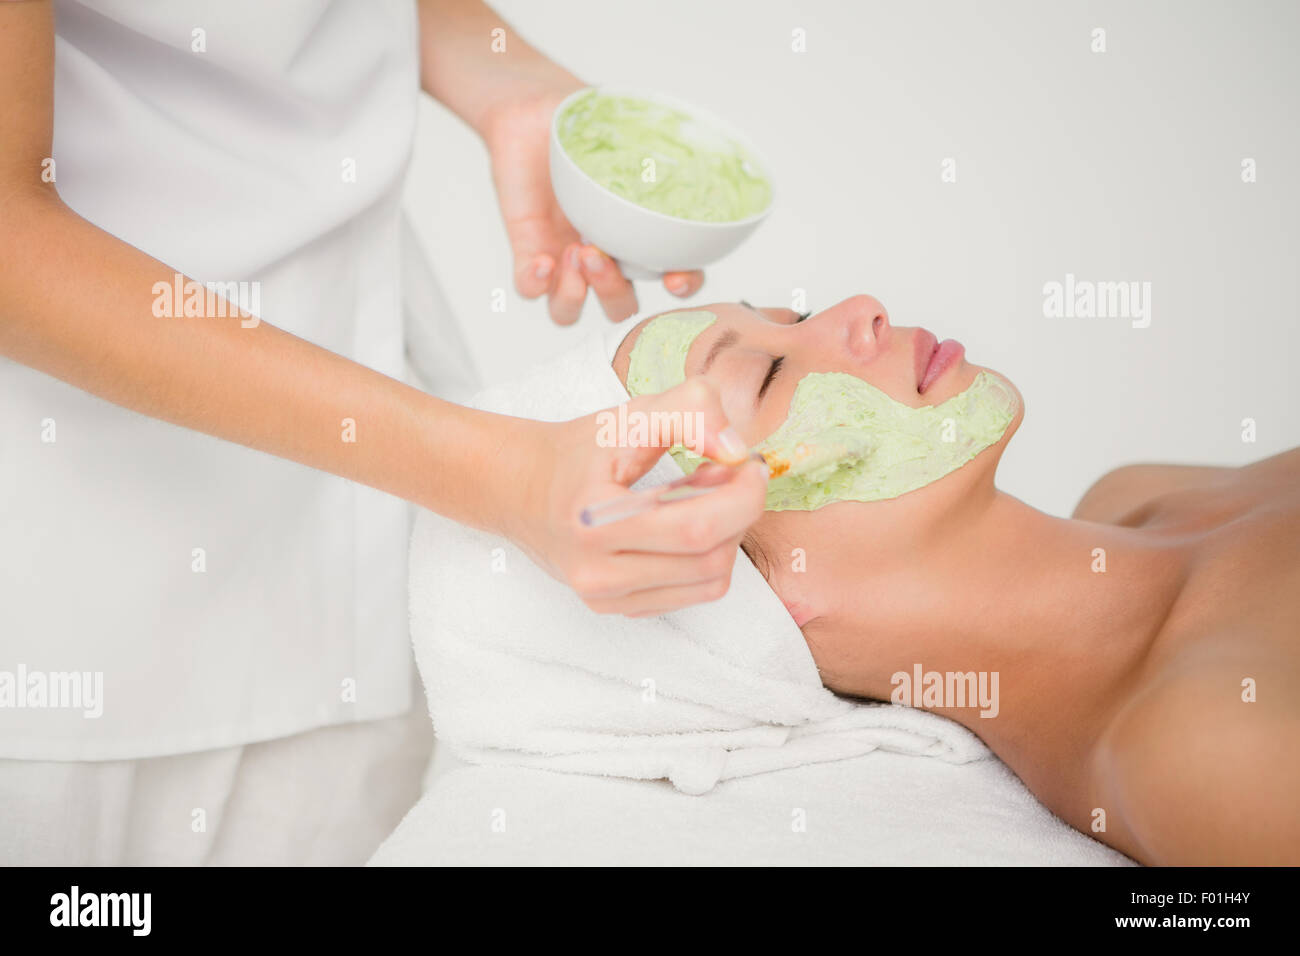 Beautiful brunette getting a facial treatment Stock Photo